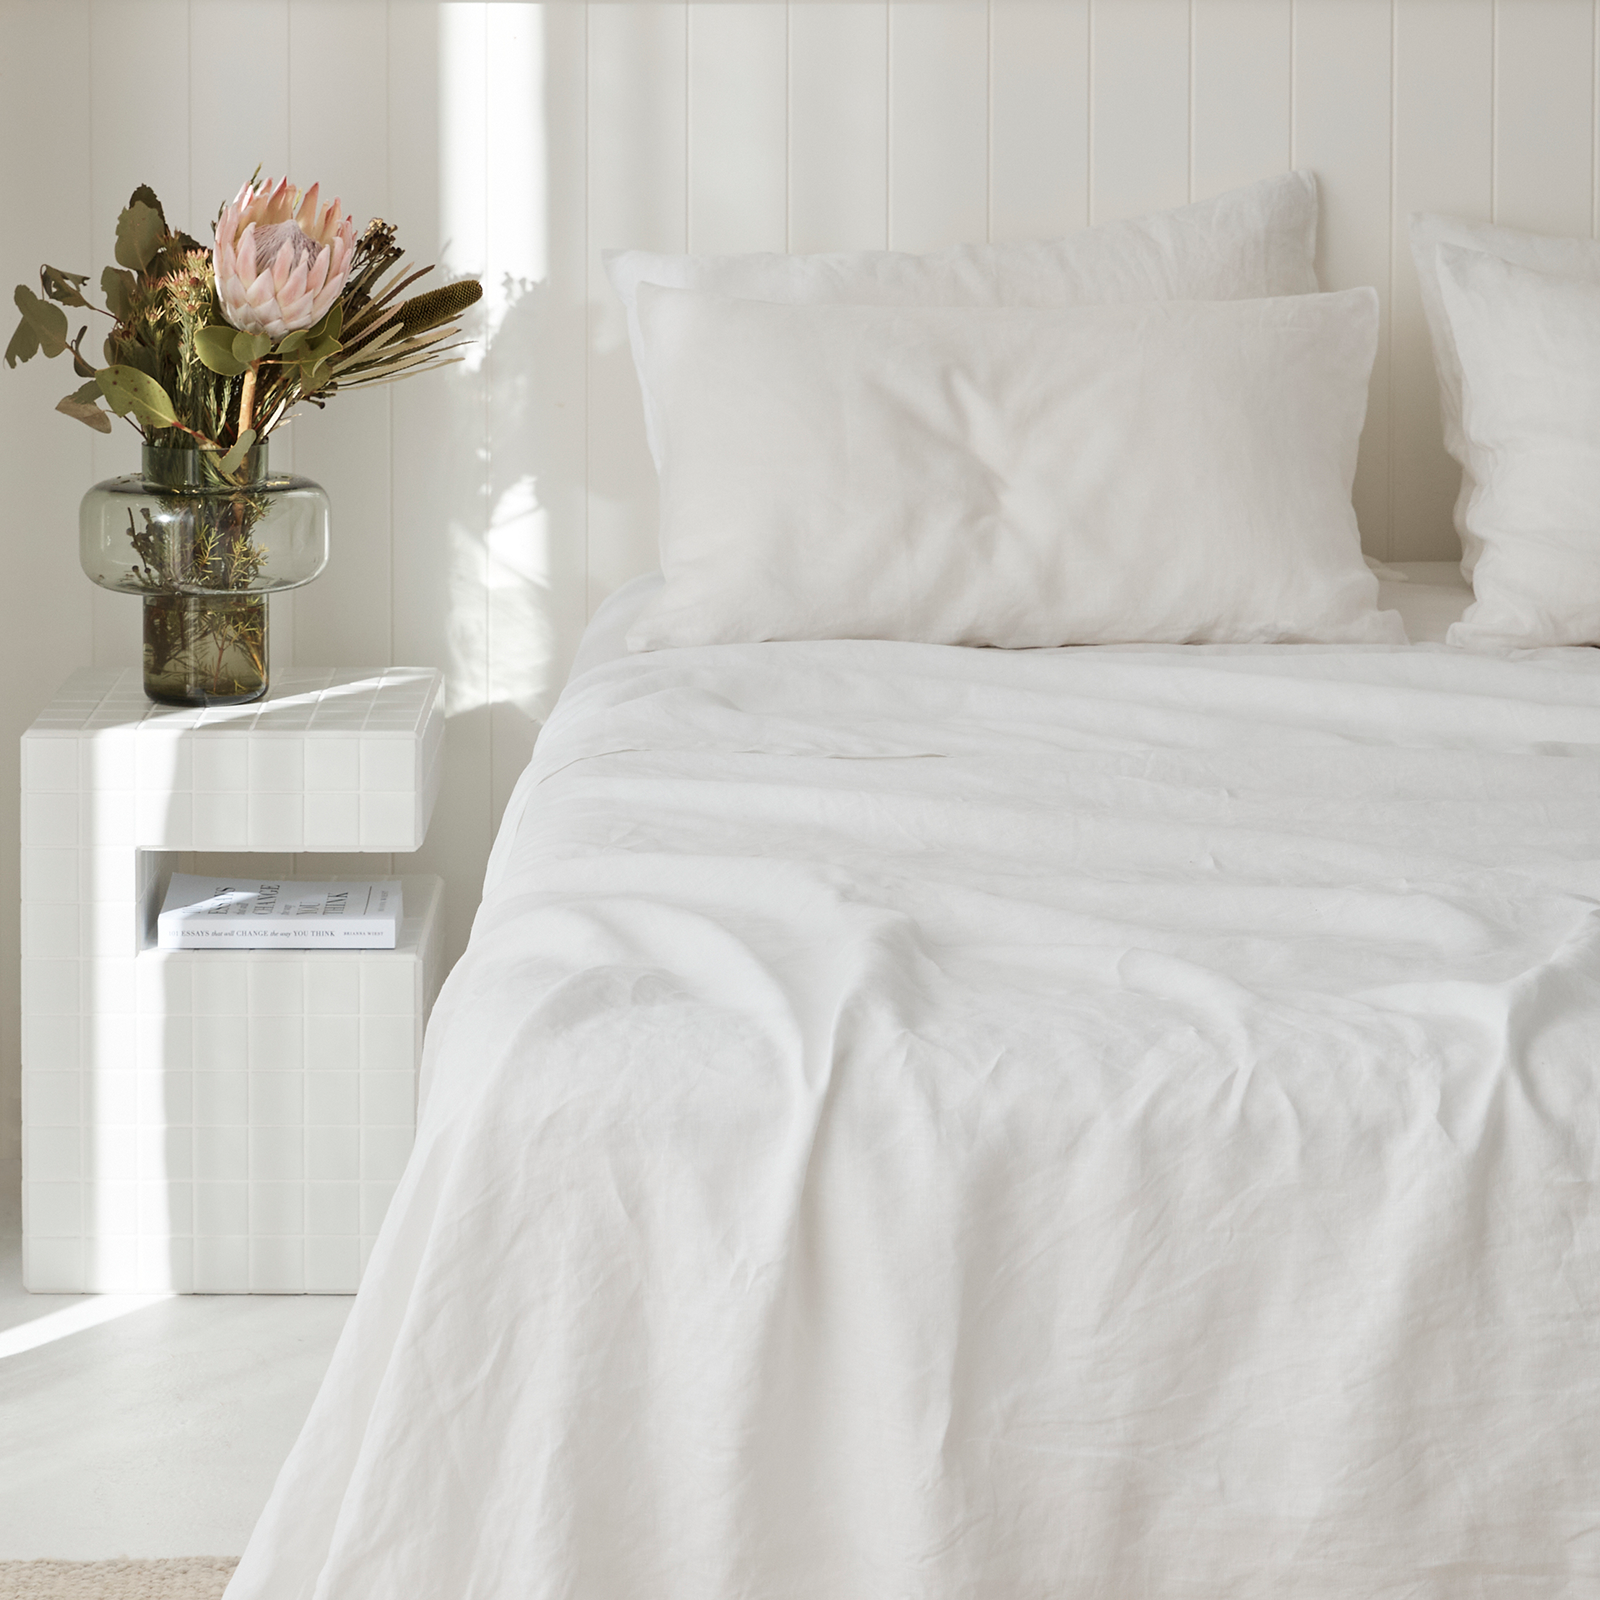 100% pure French linen sheet set in White